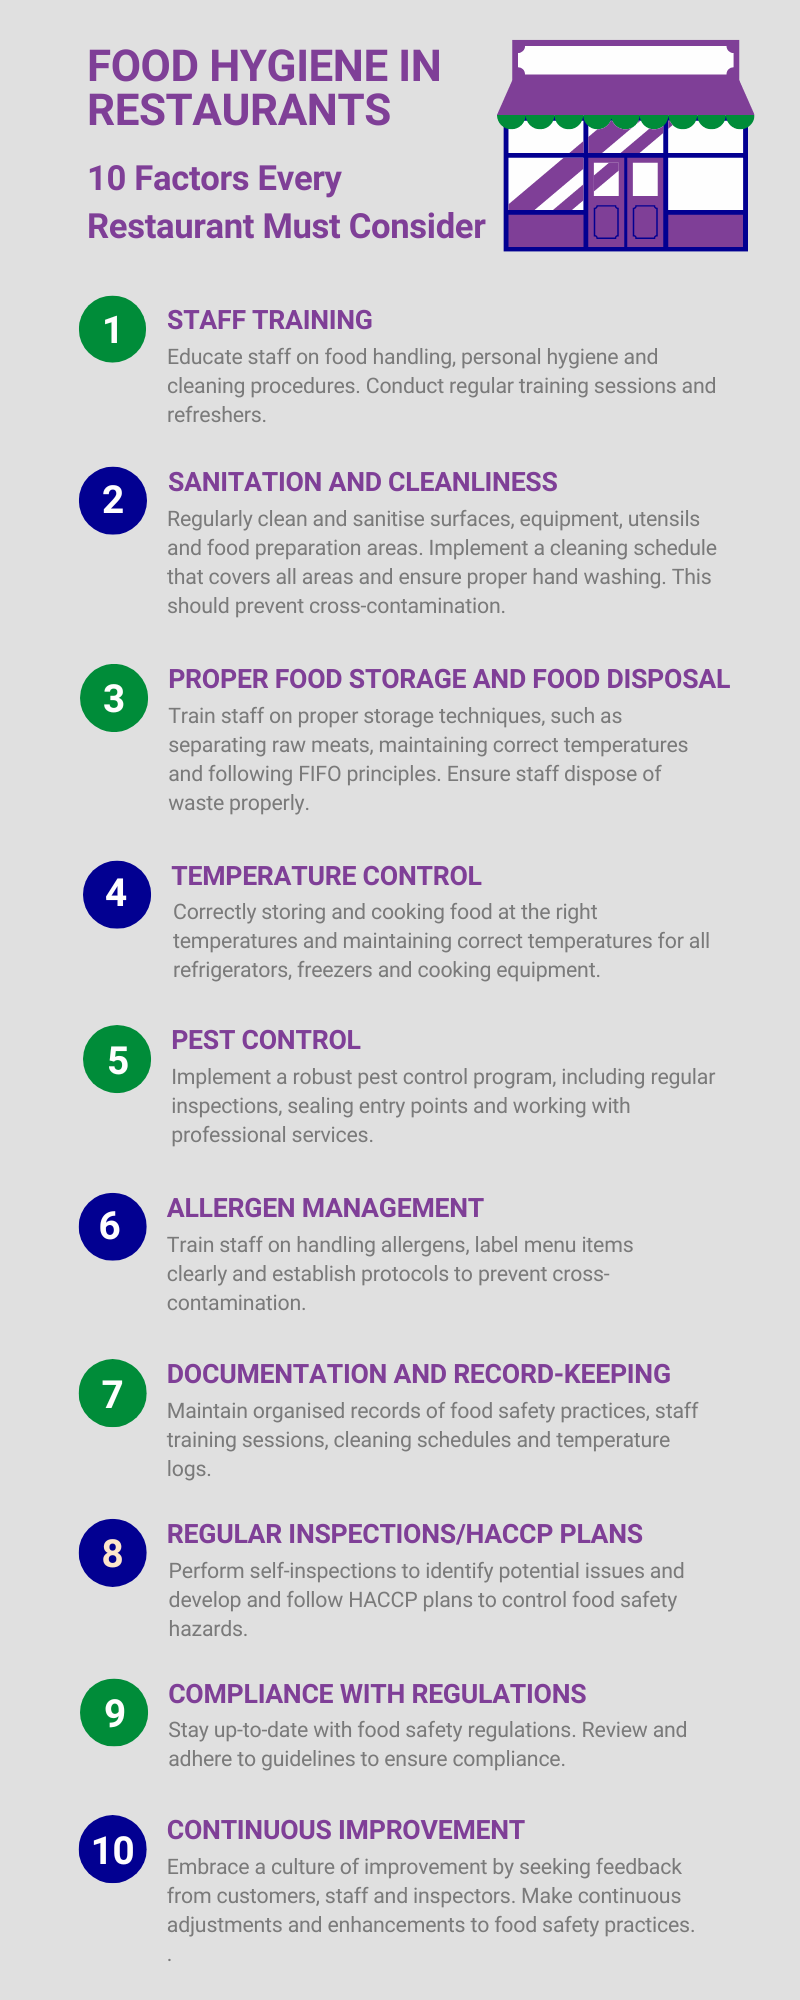 Infographic which shows the 10 most important food hygiene factors a restaurant must consider